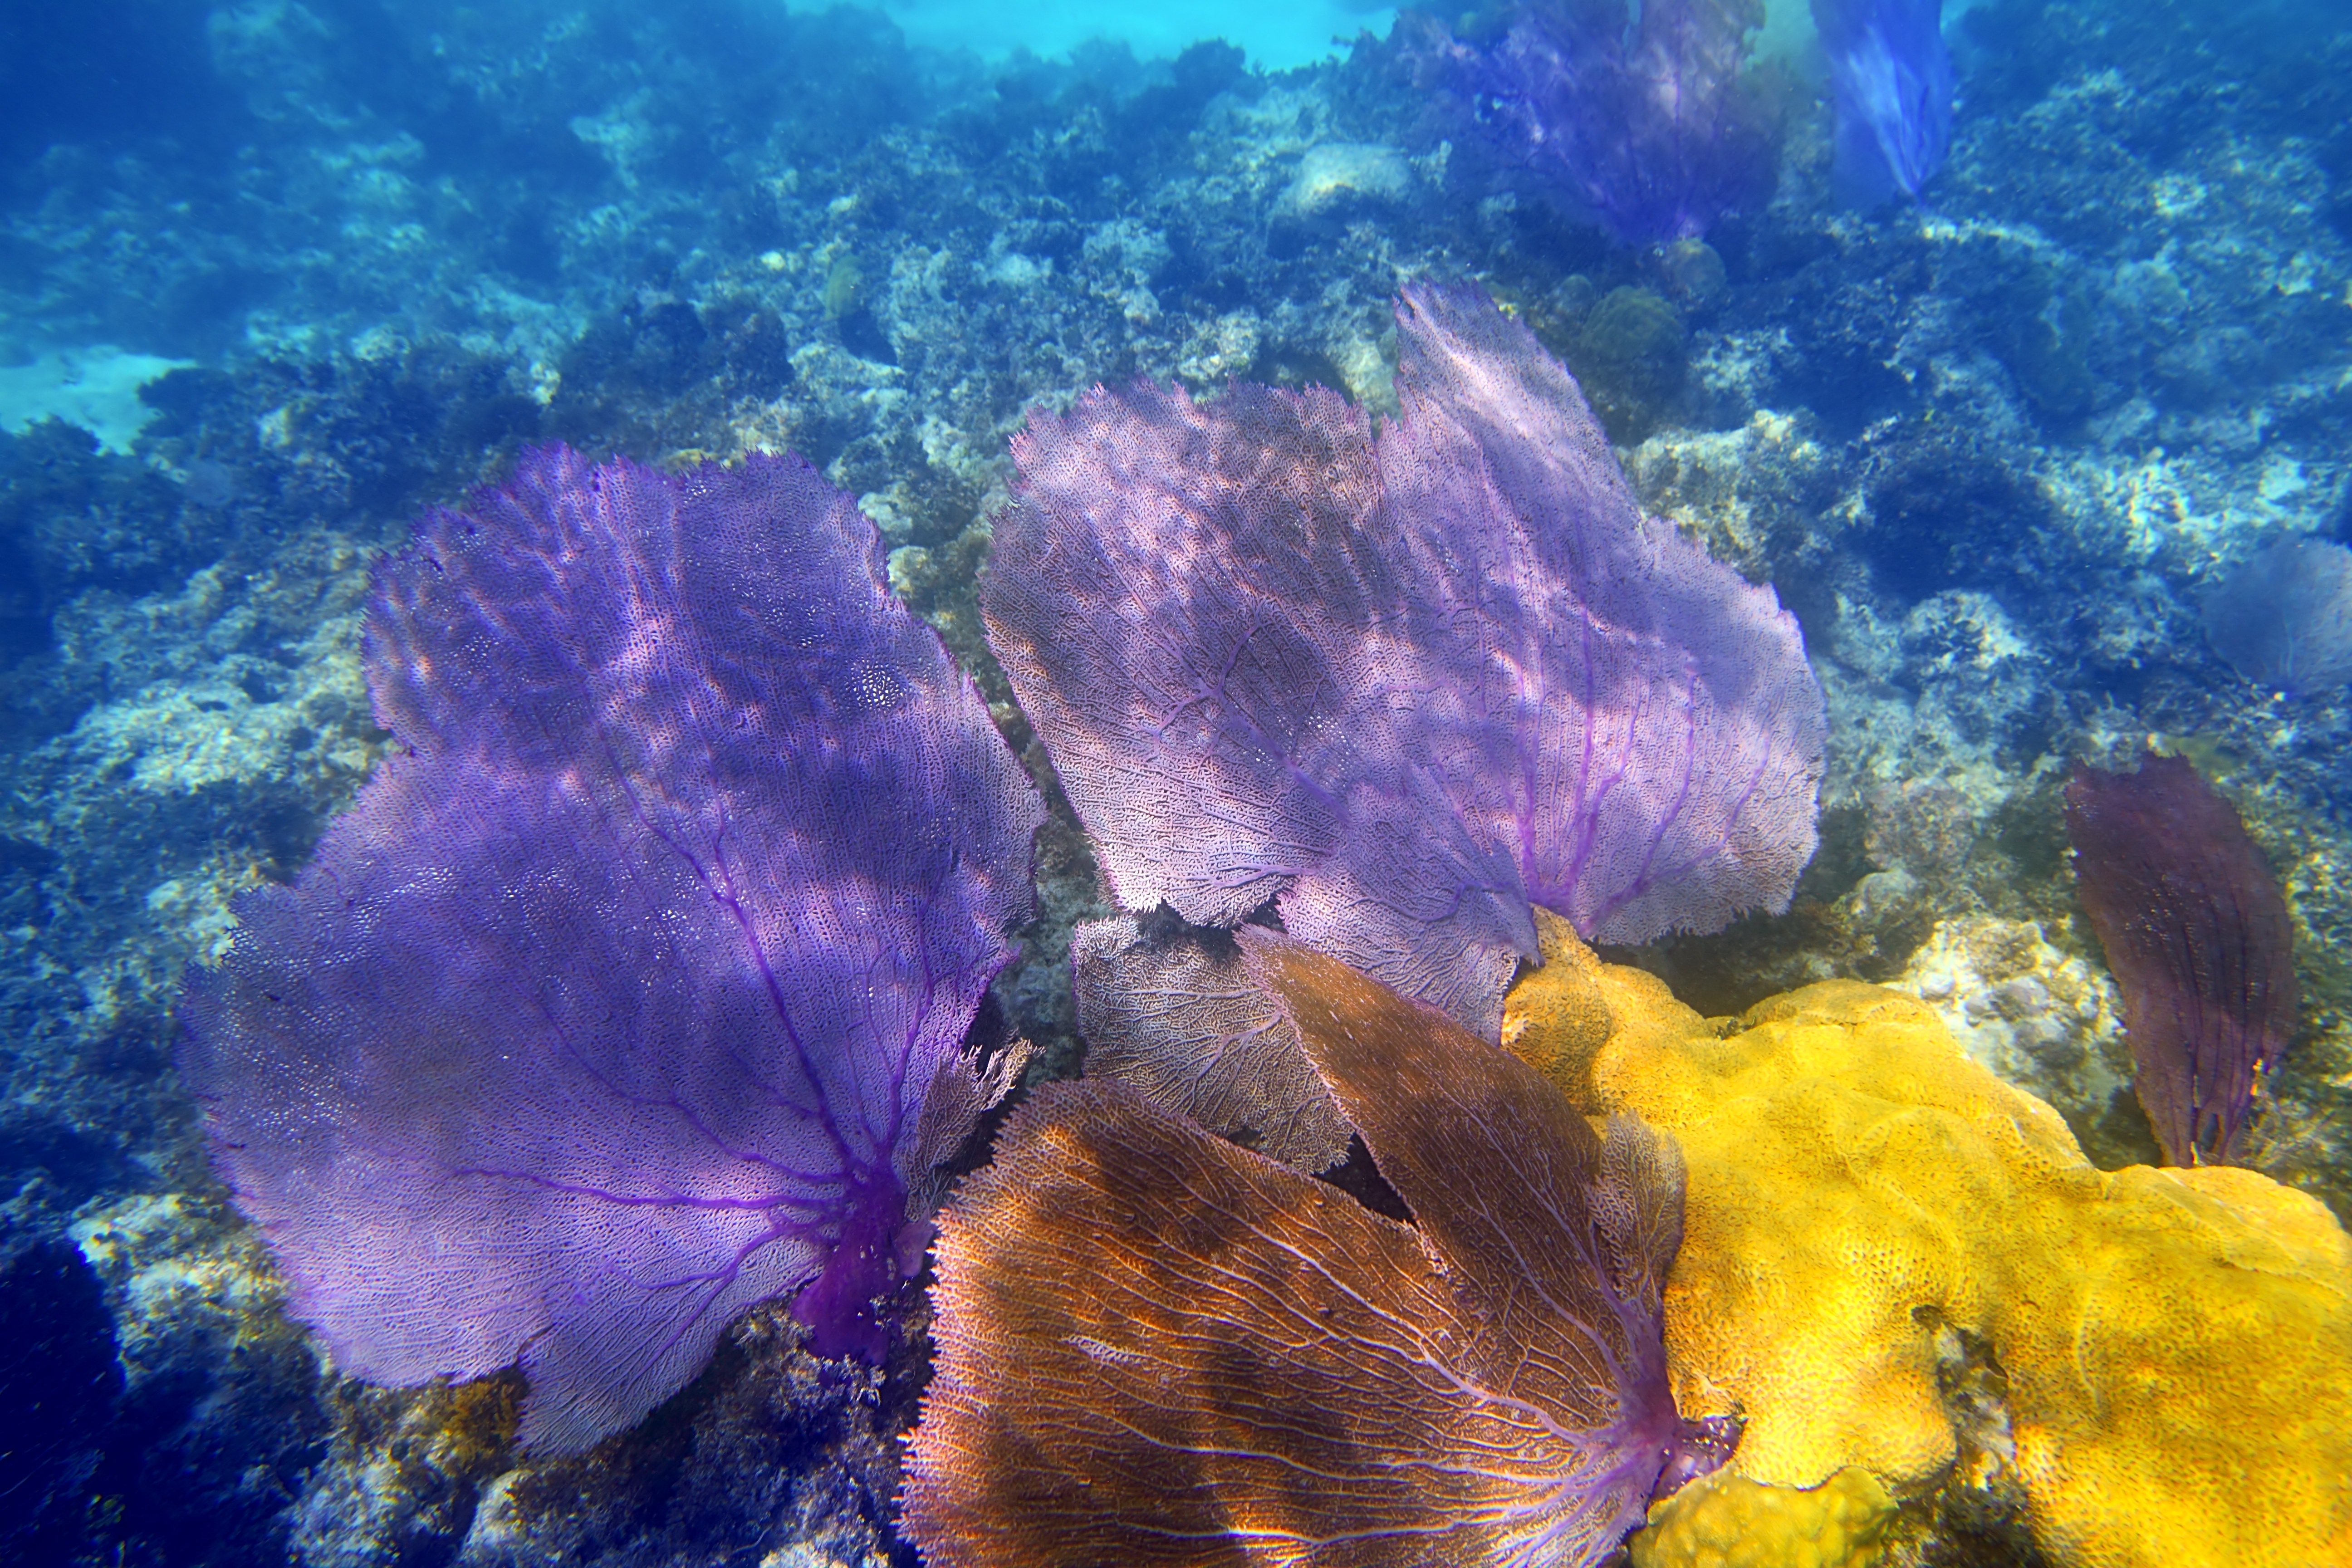 Yellow, red, purple, and lavendar gorgonians sway side to side in the shallow waters of the ocean